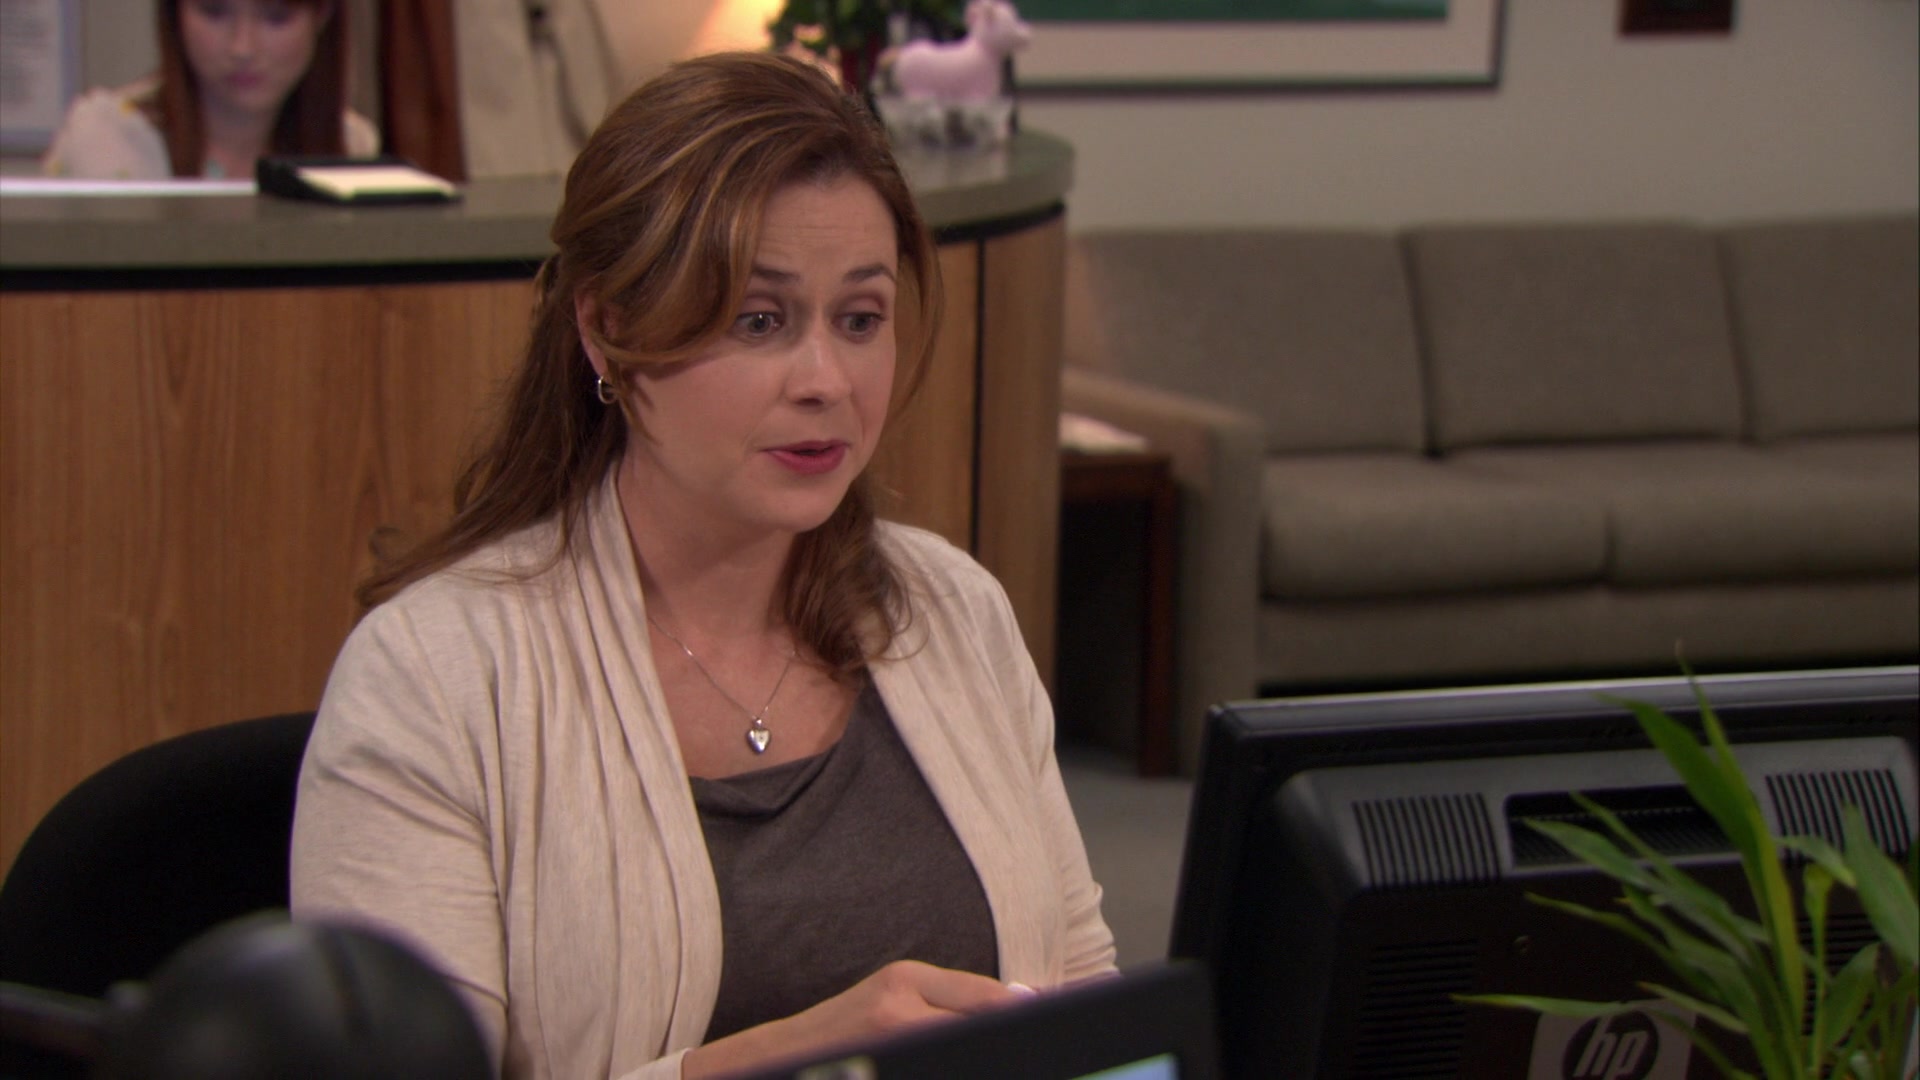 HP Monitor Used by Jenna Fischer (Pam Beesly) in The Office - Season 8, Epi...